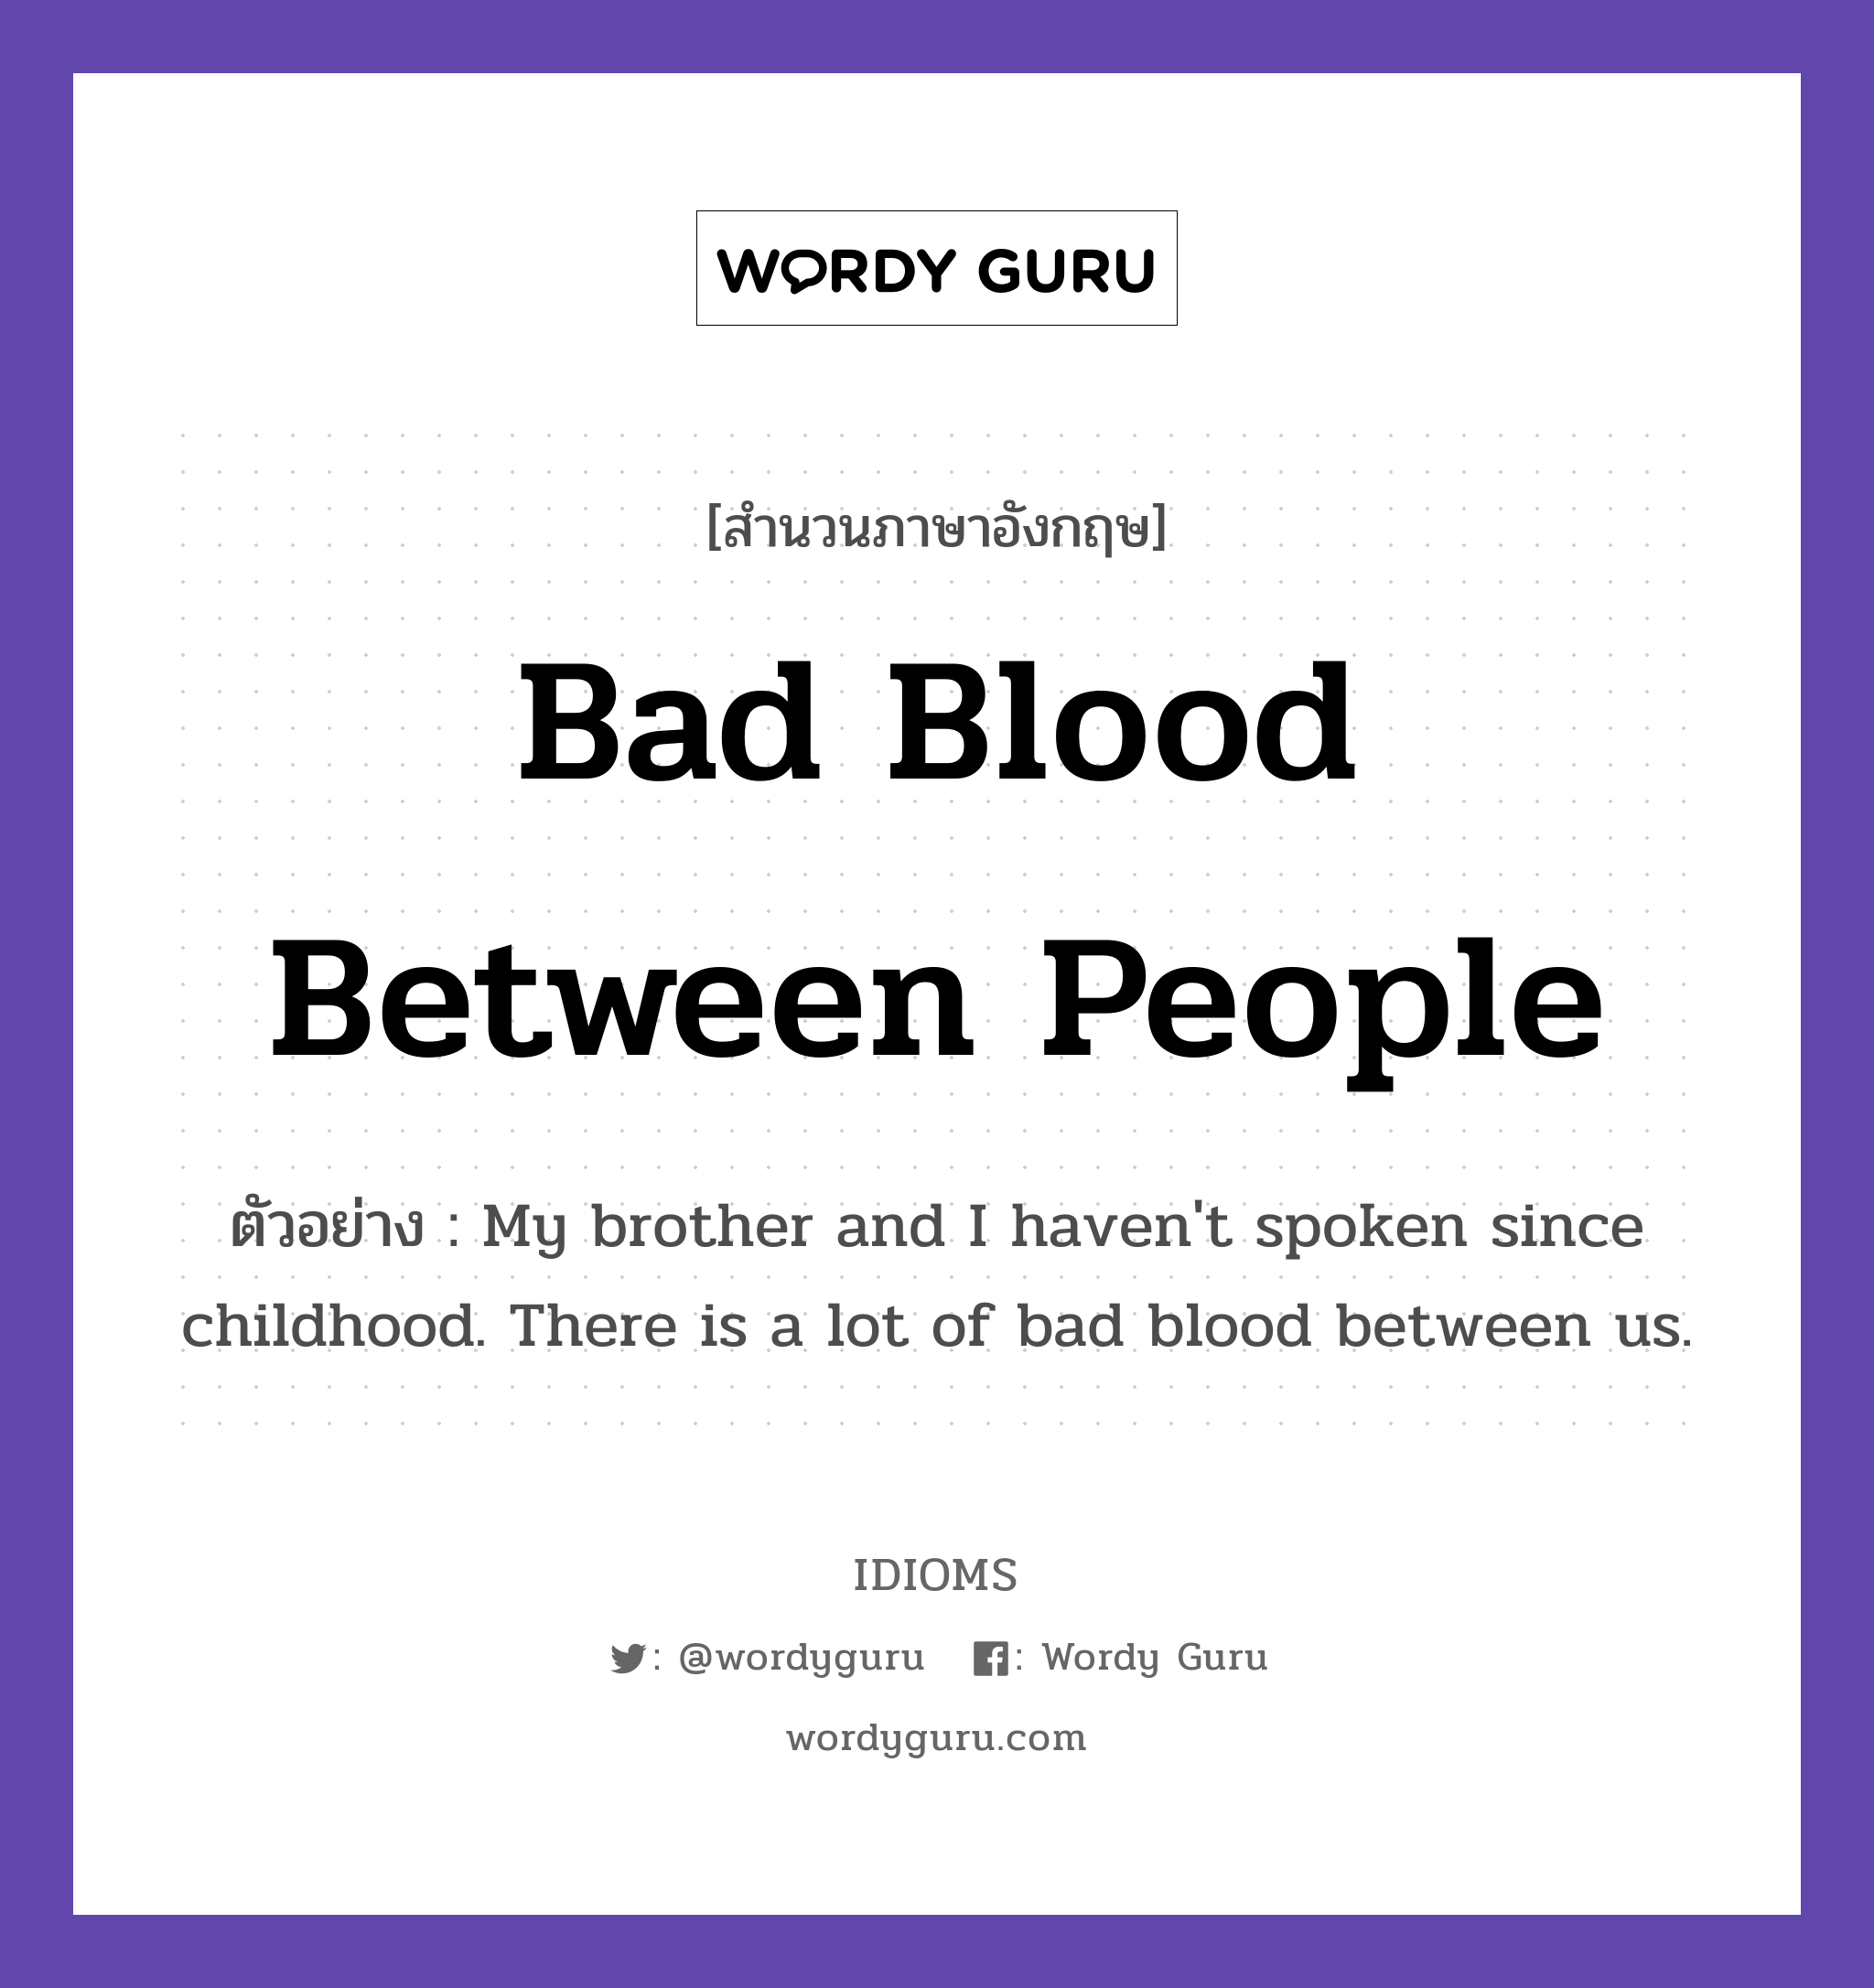 Bad Blood Between People แปลว่า?, สำนวนภาษาอังกฤษ Bad Blood Between People ตัวอย่าง My brother and I haven't spoken since childhood. There is a lot of bad blood between us.